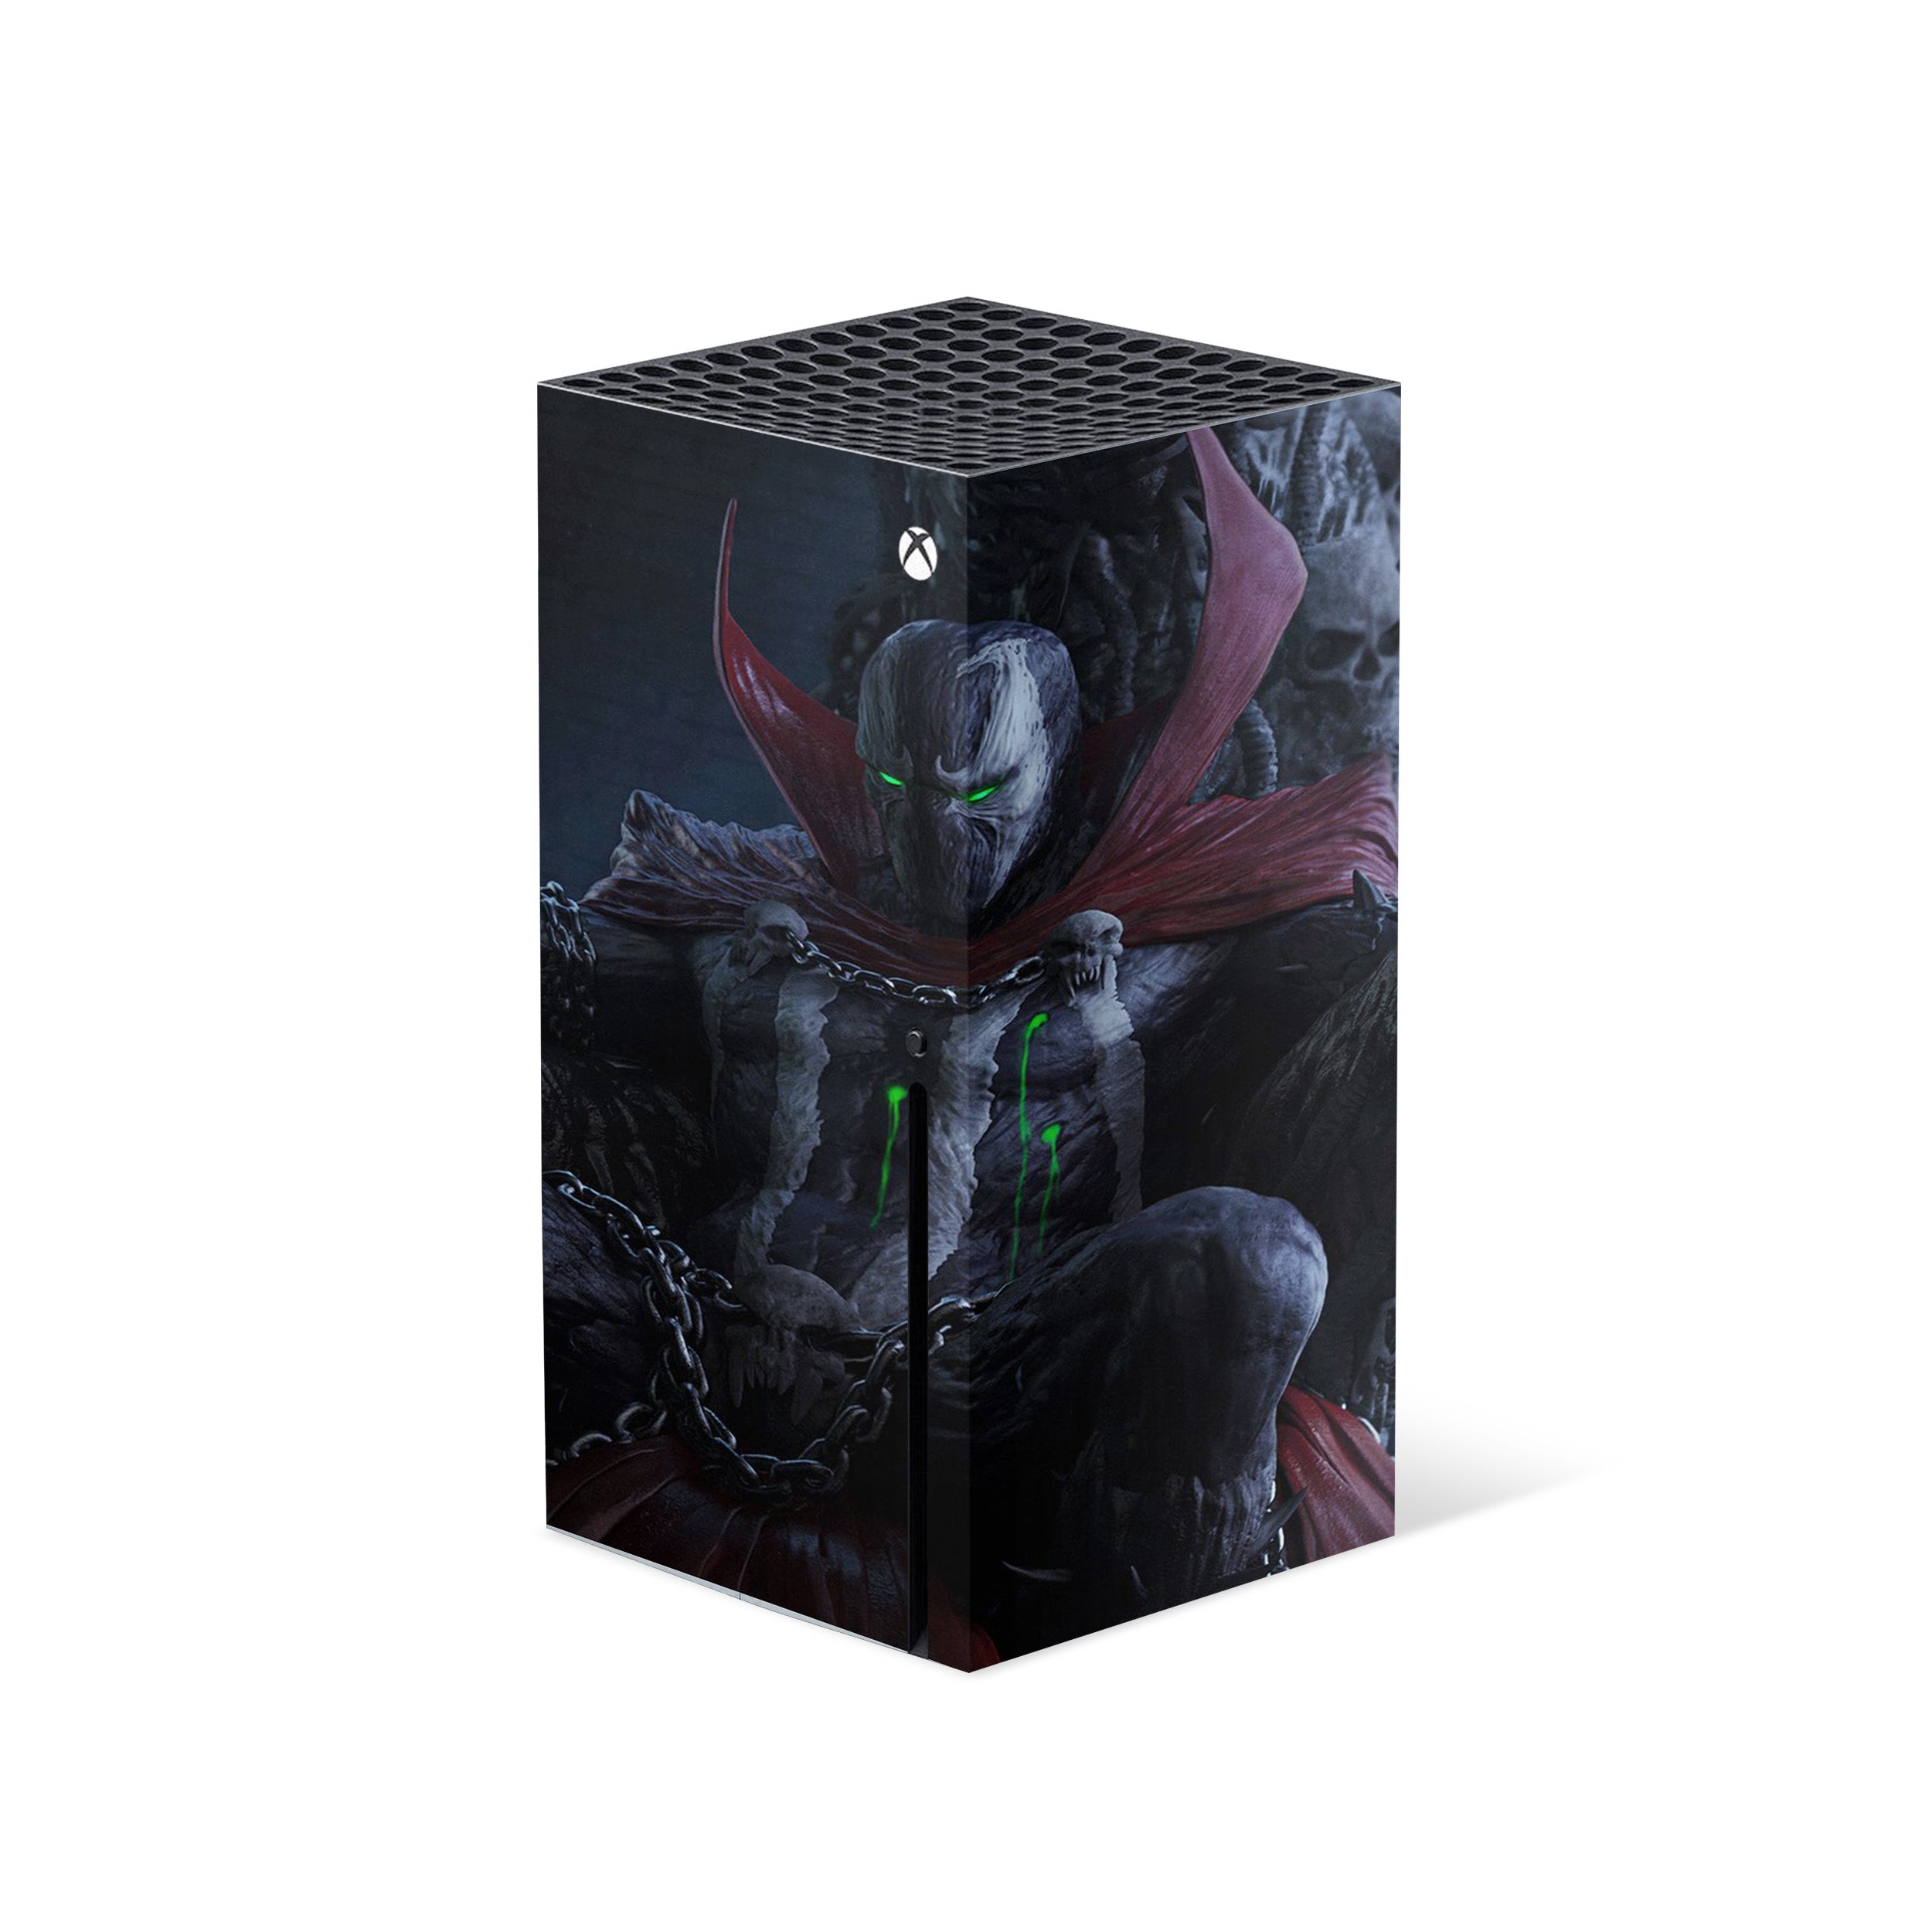 A video game skin featuring a Image Comics Spawn design for the Xbox Series X.